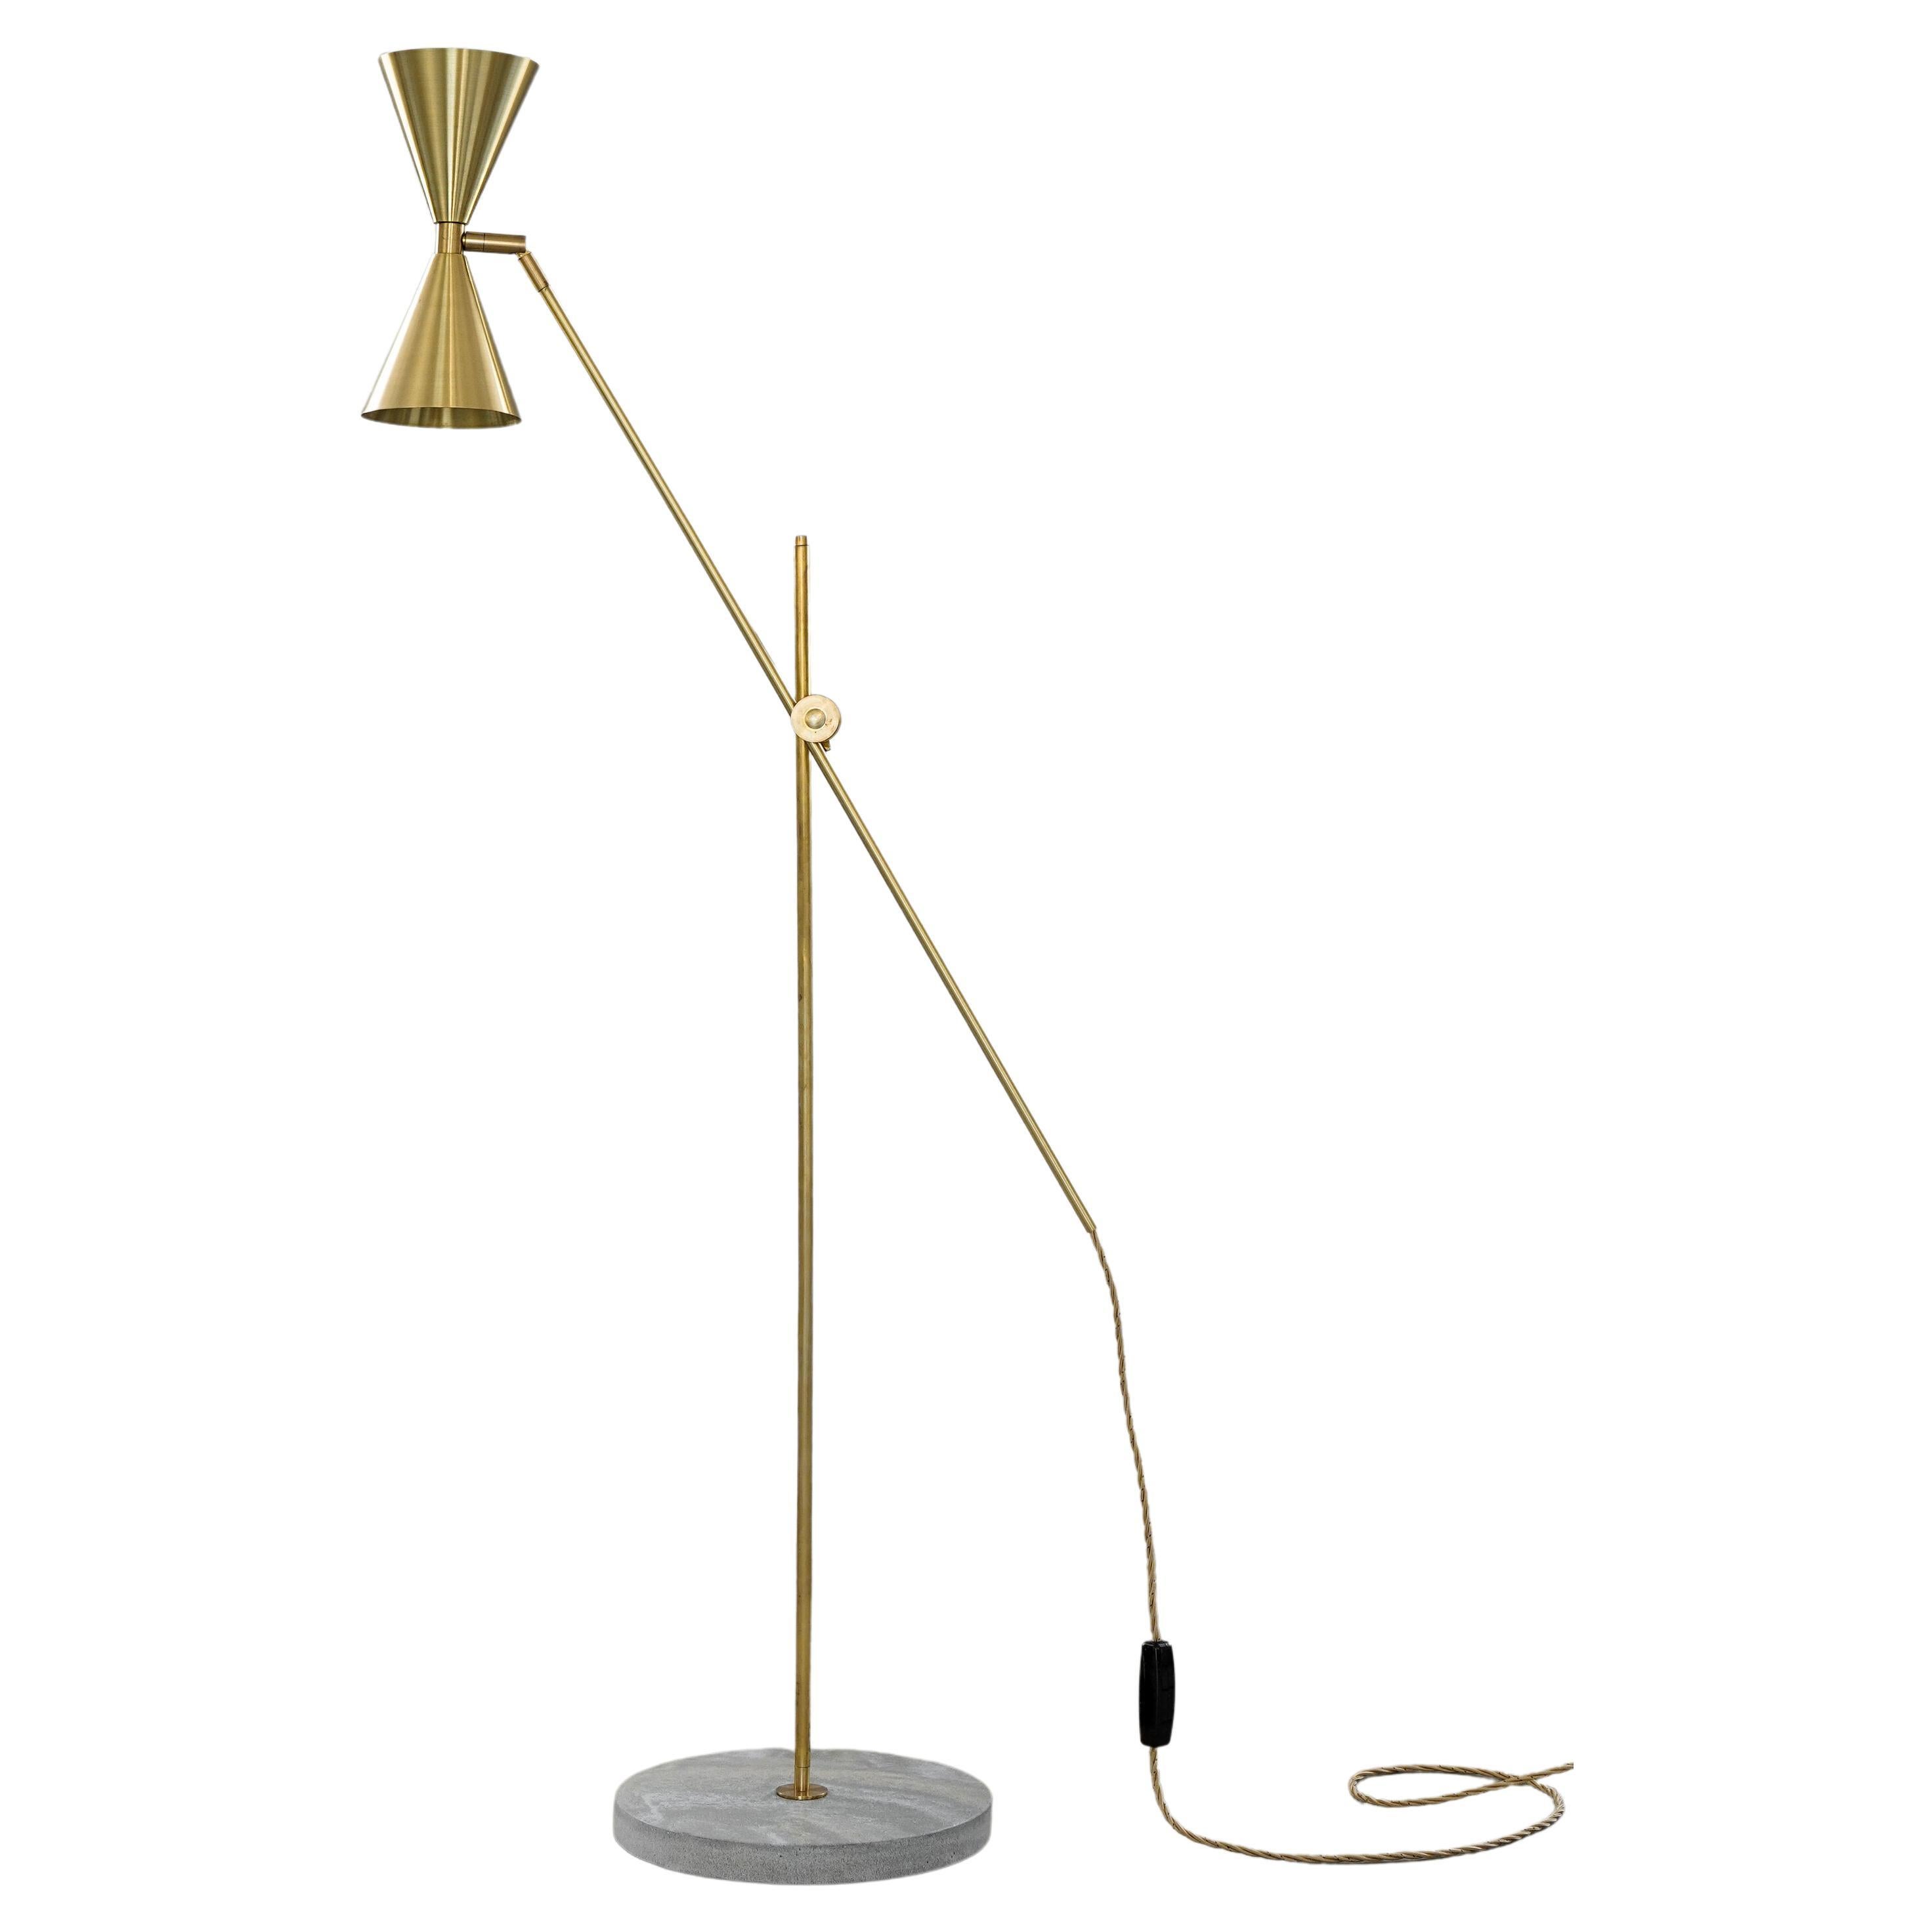 Cone Double Floor Lamp by Contain